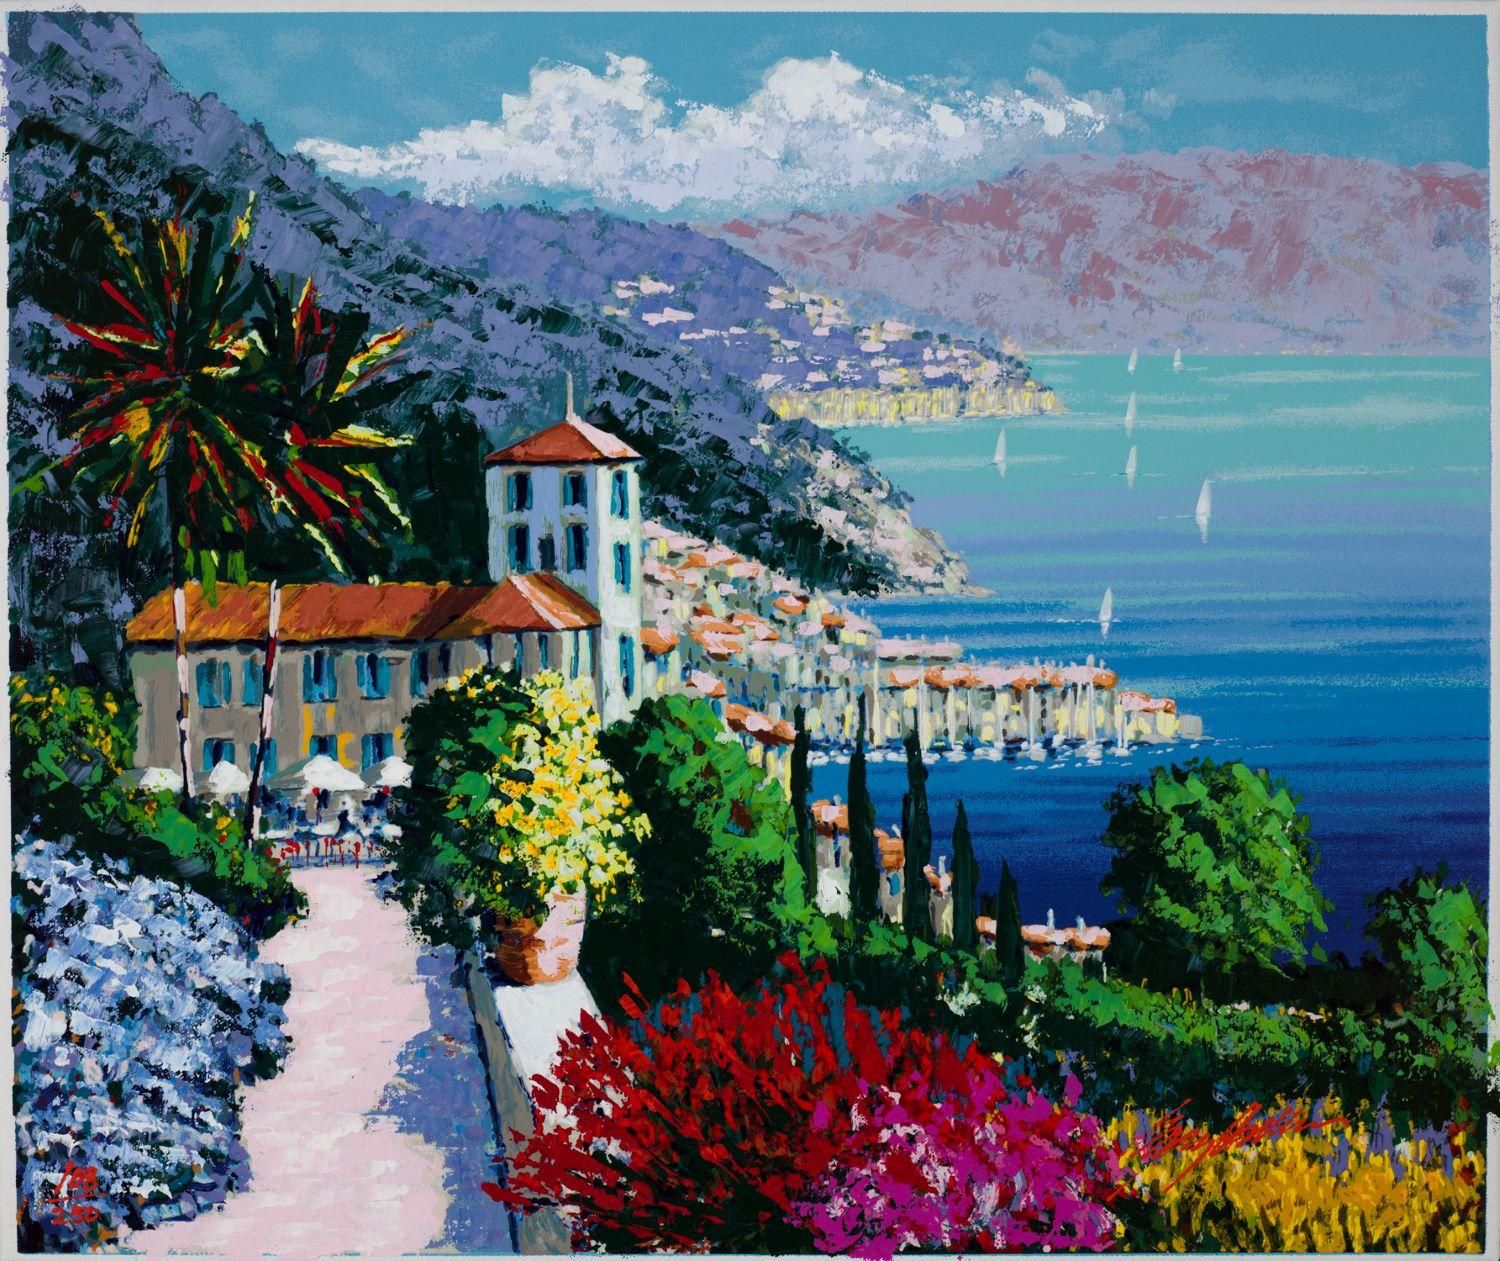 Via Fiore from the ‘La Dolce Vita’ suite is a hand-enhanced serigraph on canvas, image size 18.5 x 22 inches, signed ‘Kerry Hallam’ lower right and annotated lower left. From the edition of 260, numbered 108/250 (there were also 10 AP), and framed